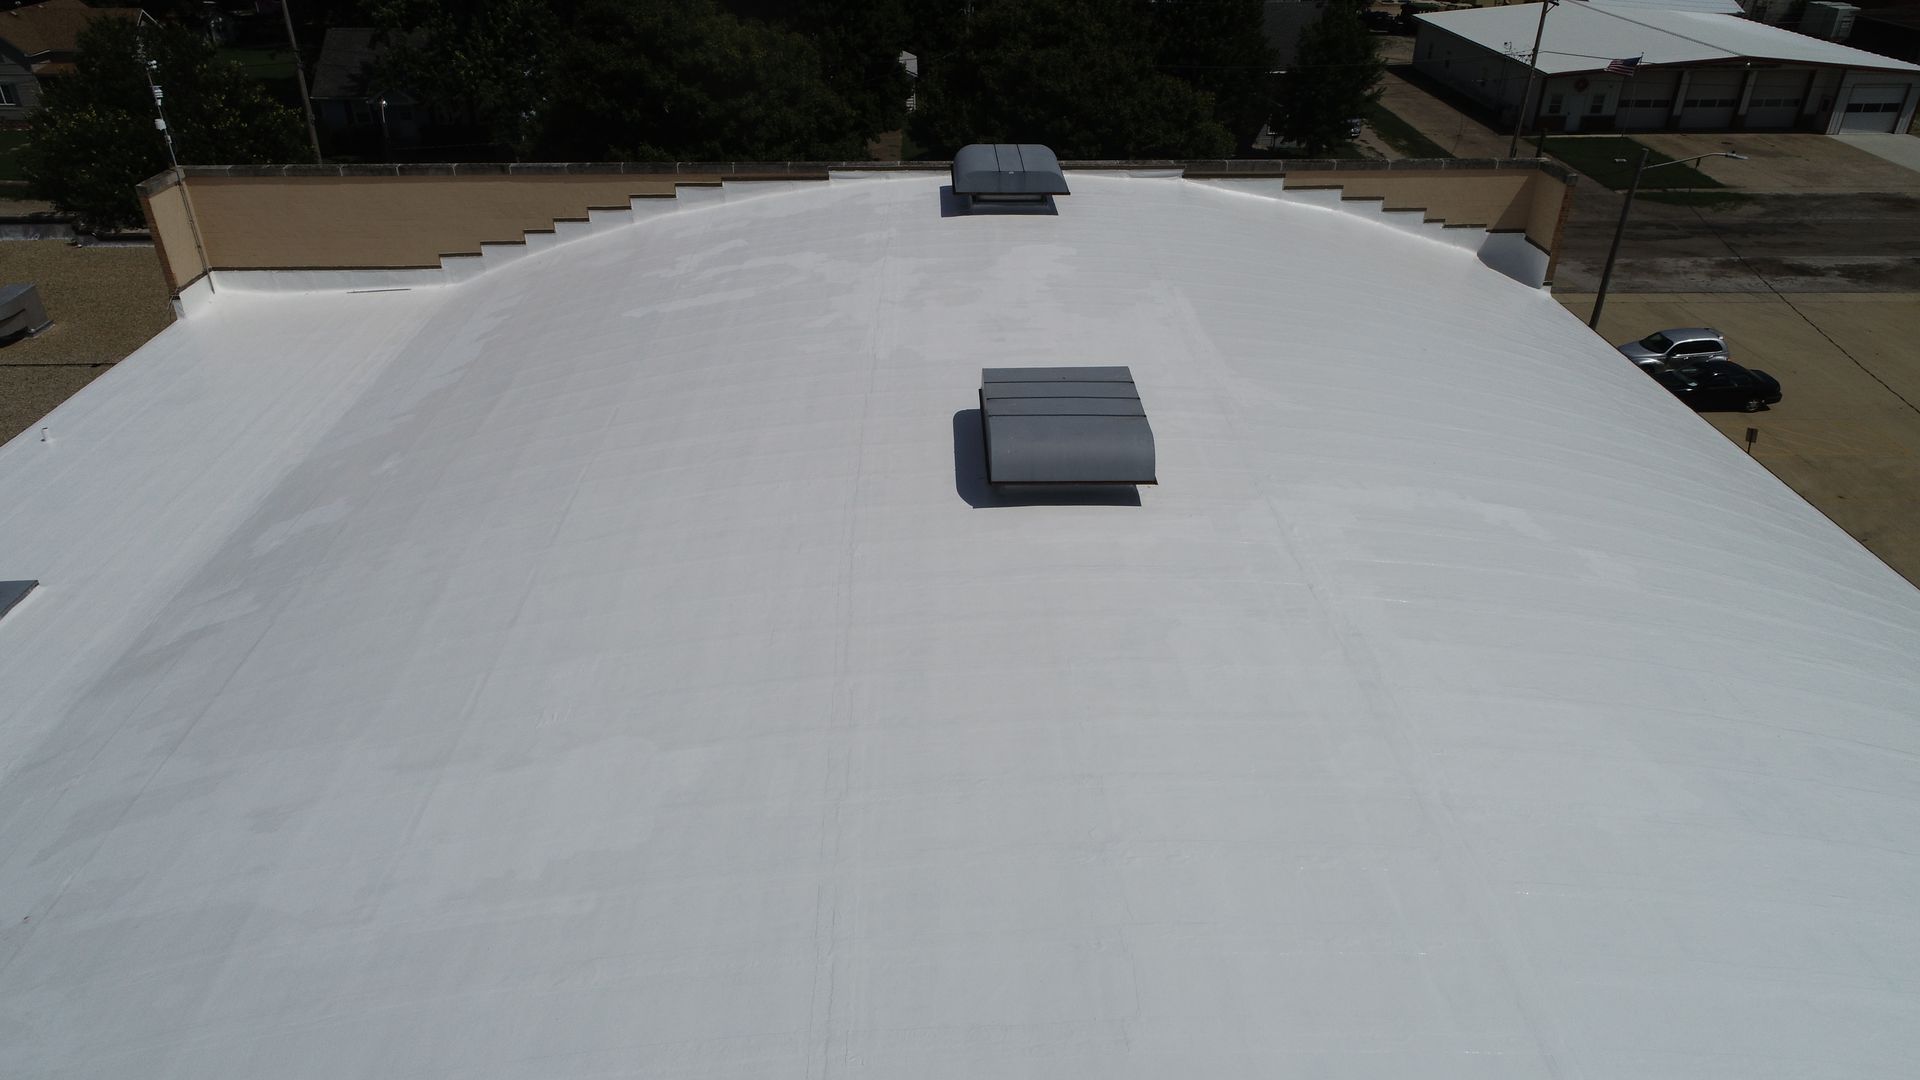 White roof coating system enhancing durability on a unique barrel roof structure.